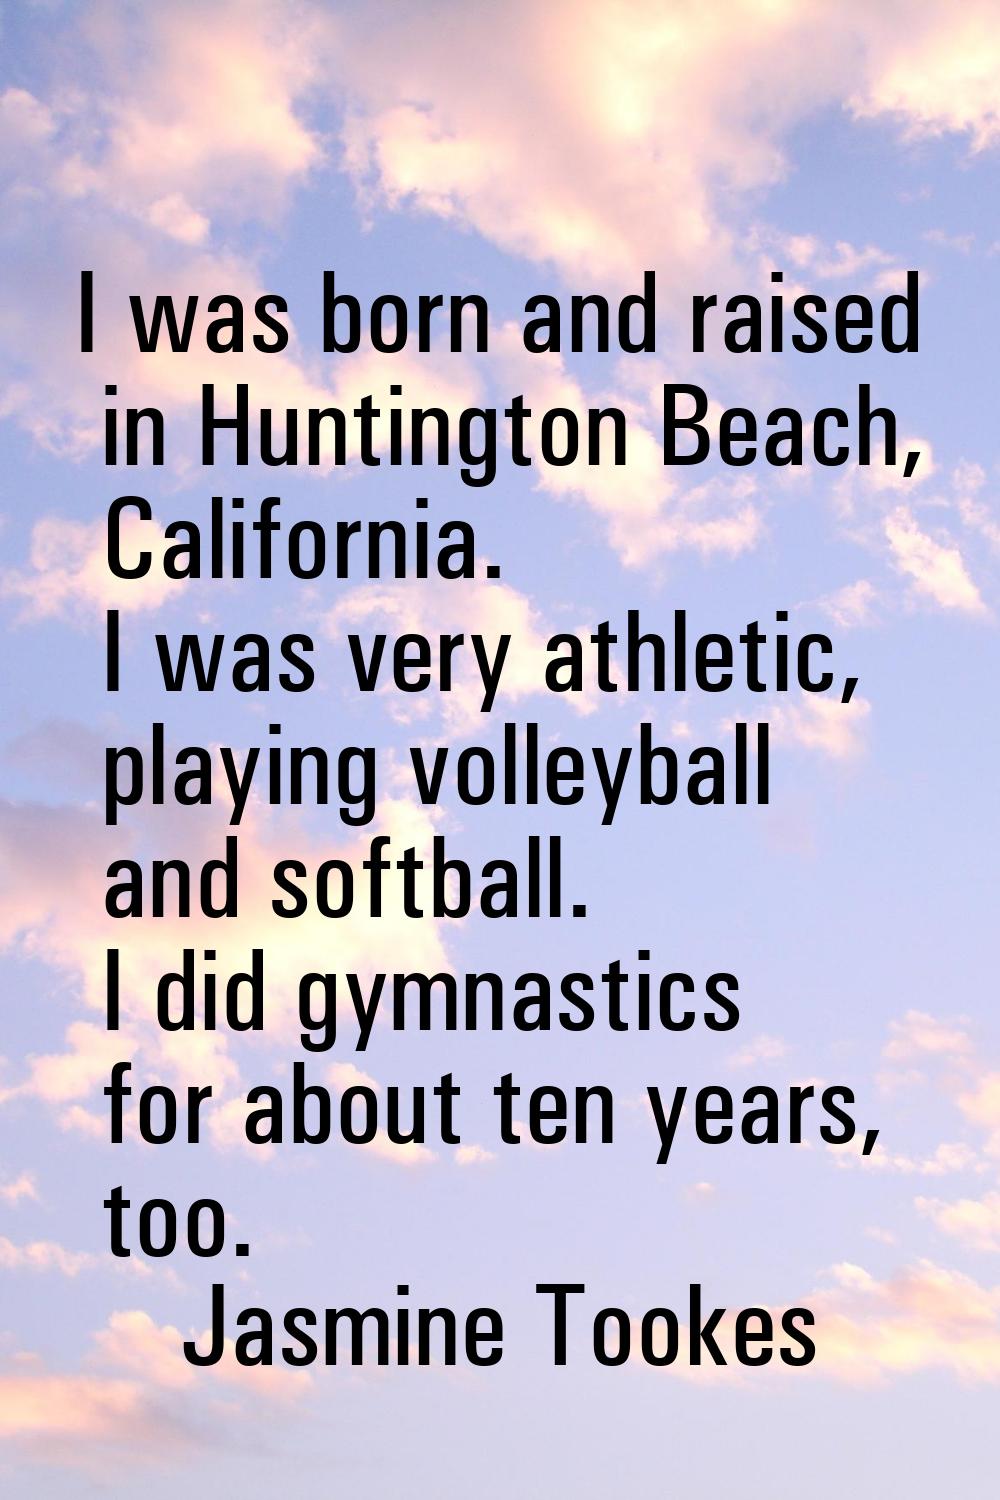 I was born and raised in Huntington Beach, California. I was very athletic, playing volleyball and 